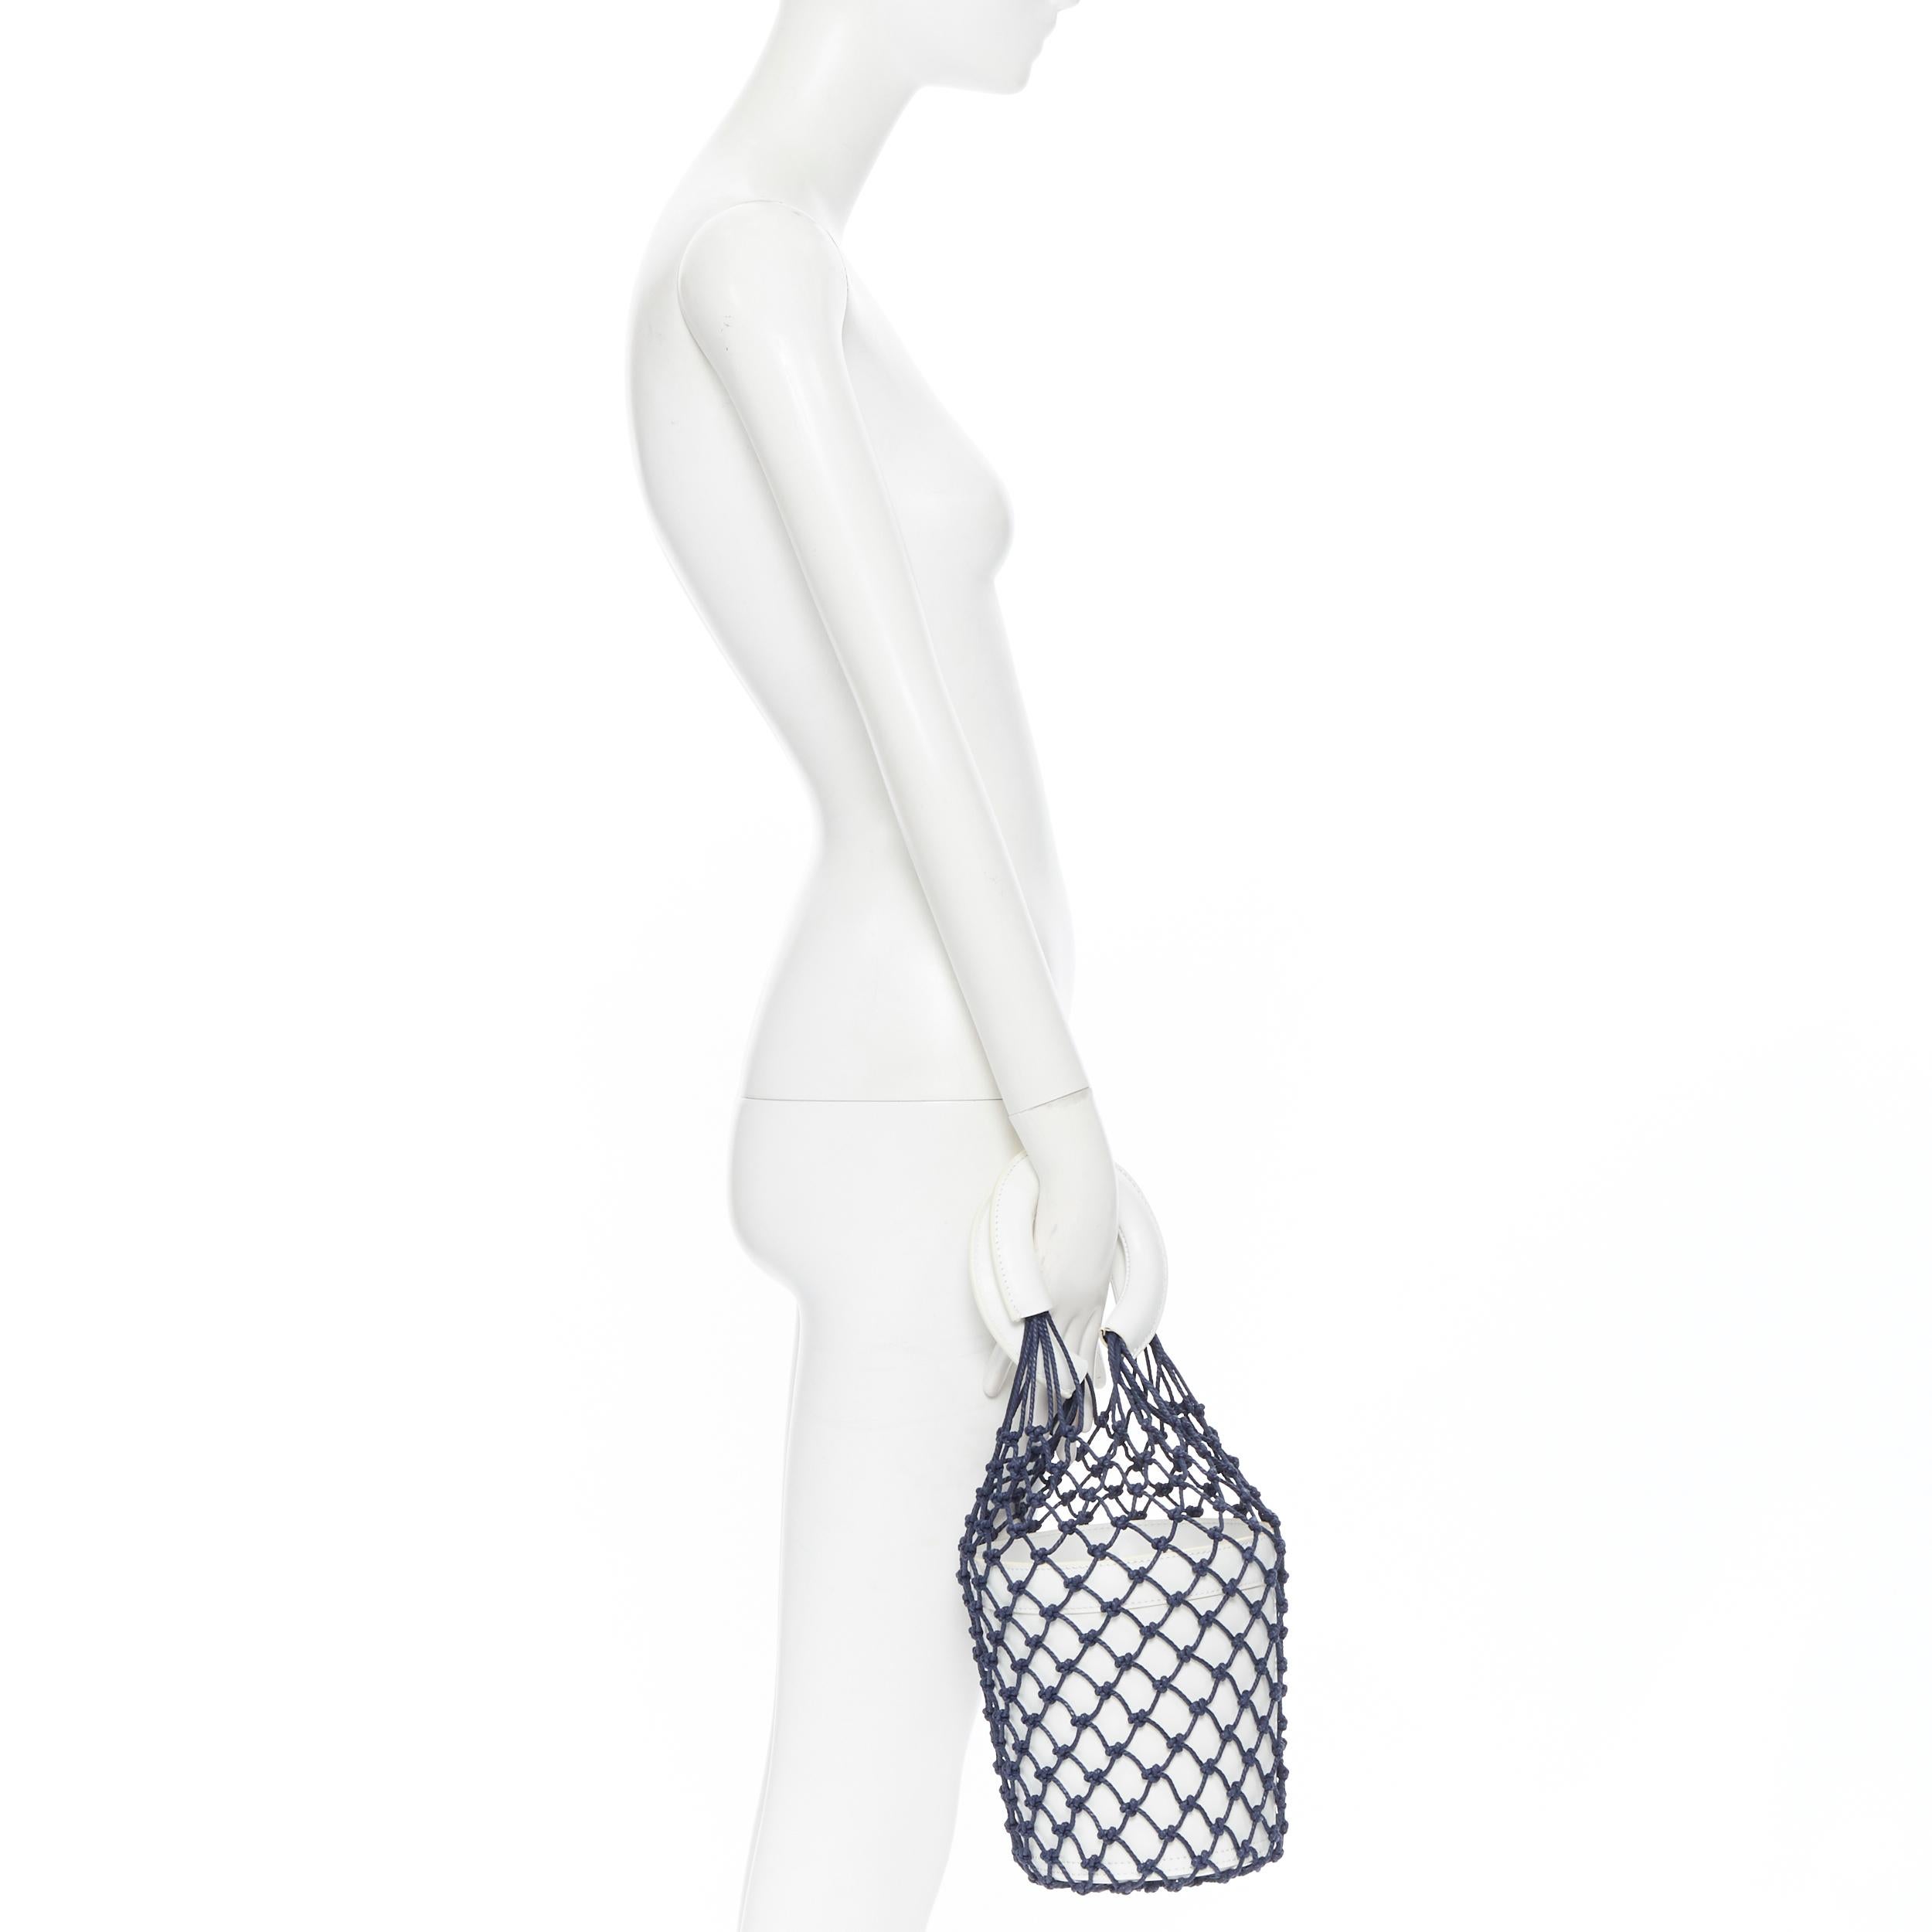 STAUD Moreau Net navy fishnet white leather bucket bag
Brand: Staud
Model Name / Style: Moreau bucket bag
Material: Leather
Color: White, navy
Pattern: Solid
Extra Detail: Moreau bag. Fishnet upper. 
Made in: China

CONDITION: 
Condition: Good, this